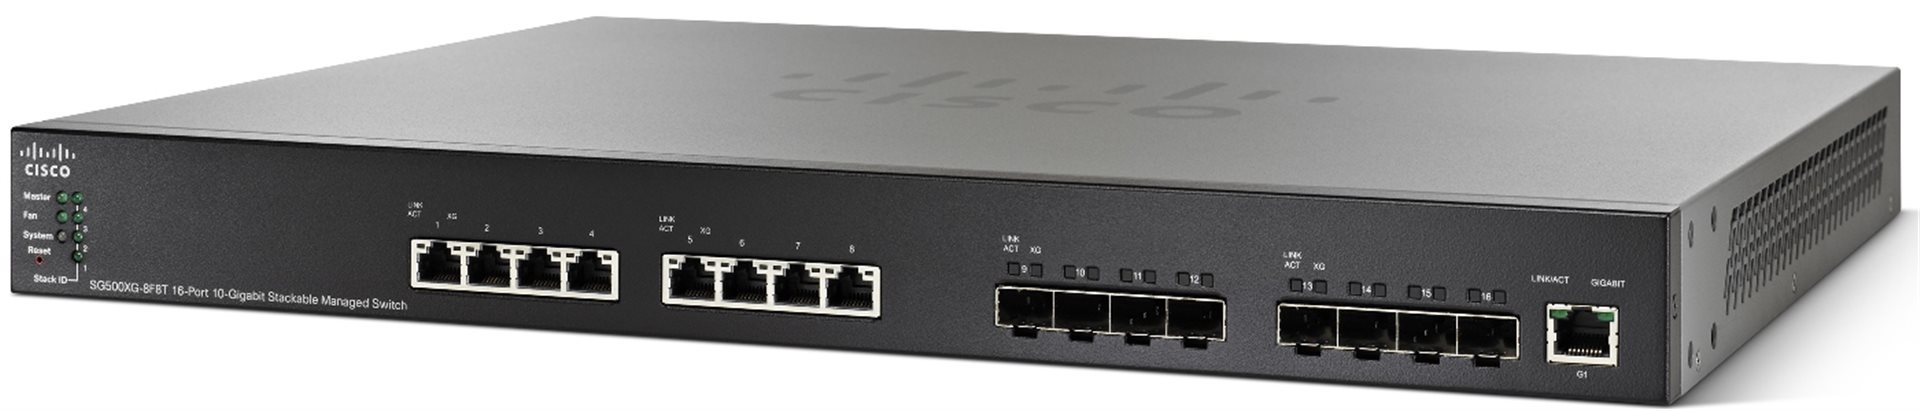 16-port 10 Gig Managed Switch REMANUFACTURED 